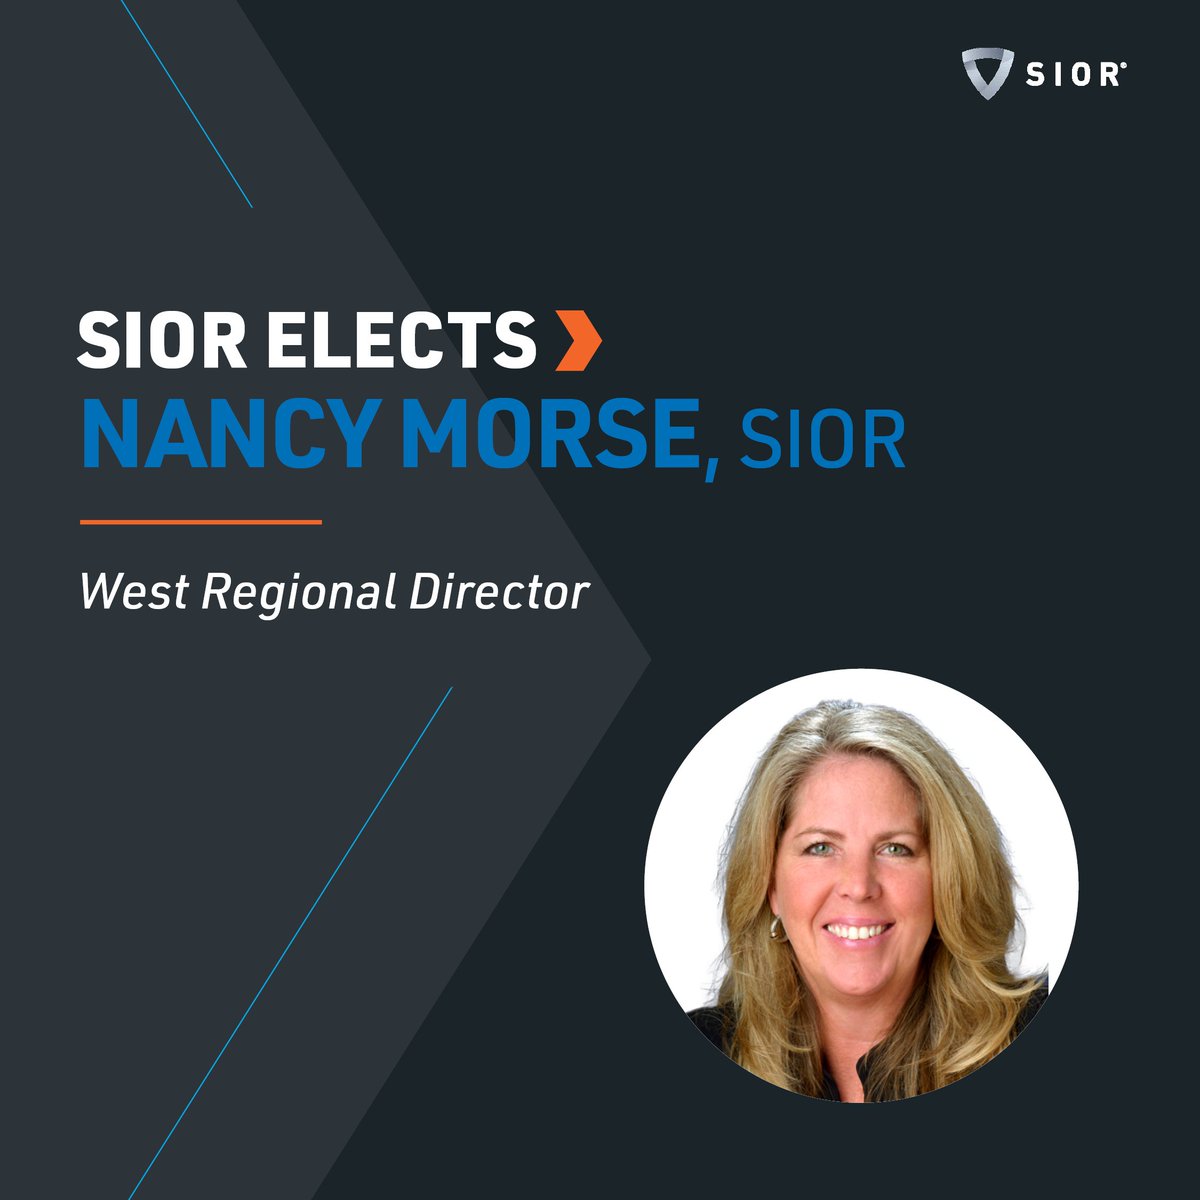 Thrilled to announce that Nancy Morse, SIOR, was officially elected to serve as SIOR's West Regional Director! With leadership exp. on the SIOR Foundation Board as well as SIOR's Women's Leadership Group, she will lead her region with care & expertise once inducted this fall.